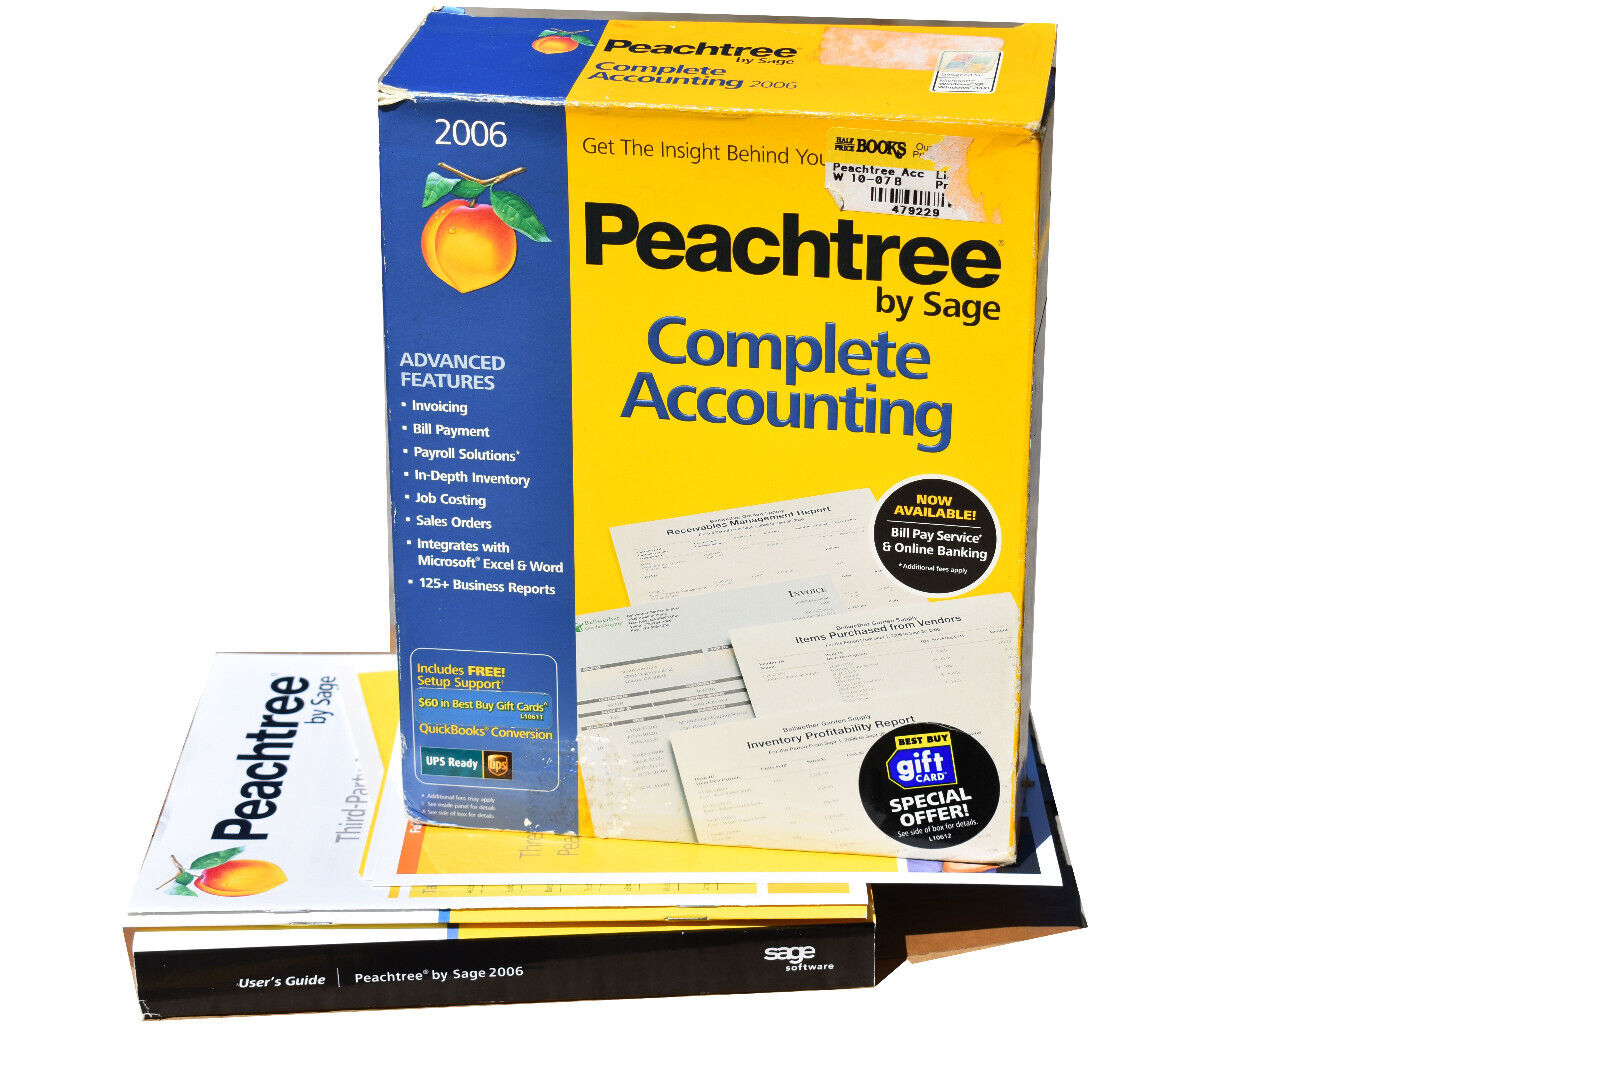 Peachtree Complete Accounting 2006 by SAGE